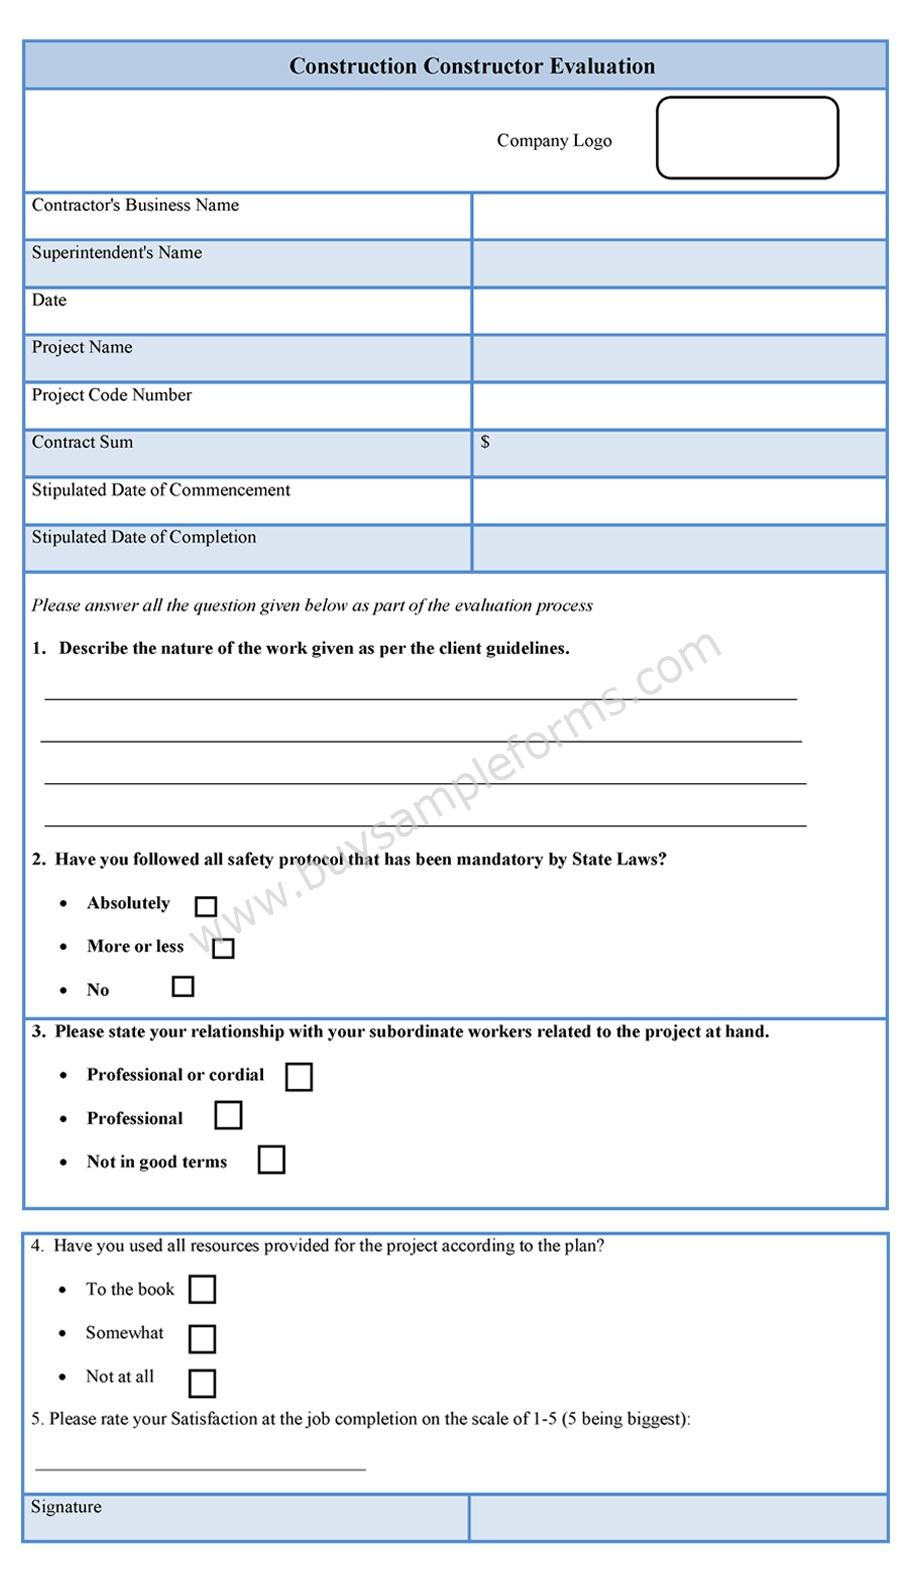 Construction Contractor Evaluation Form Sample Forms